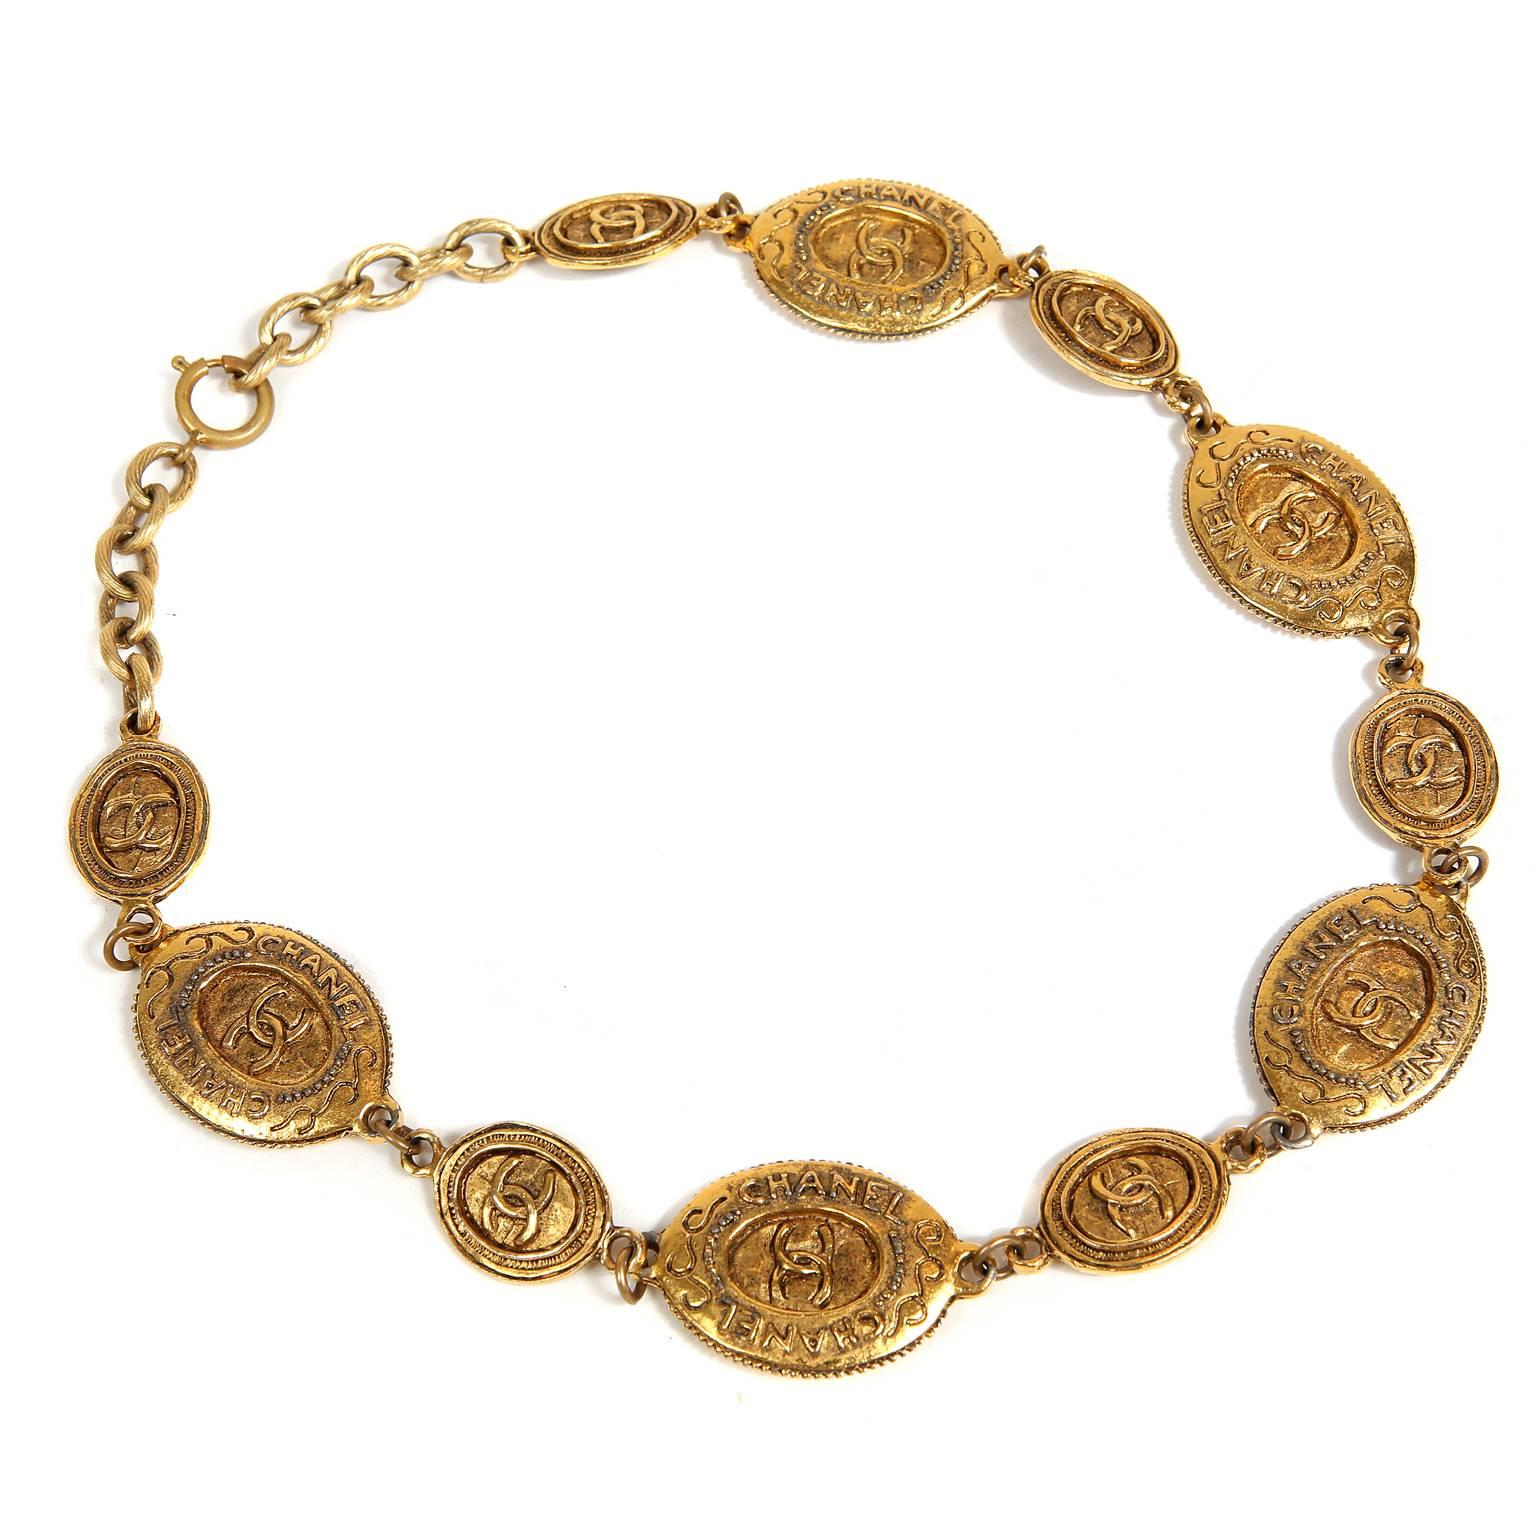 Chanel Oval Coin Necklace- PRISTINE
  Worn with everything from t- shirts to gowns, this elegant piece is a must have for any collection.

Antiqued gold oval coins in alternating sizes.  Interlocking CC design.  Adjustable length clasp closure. 